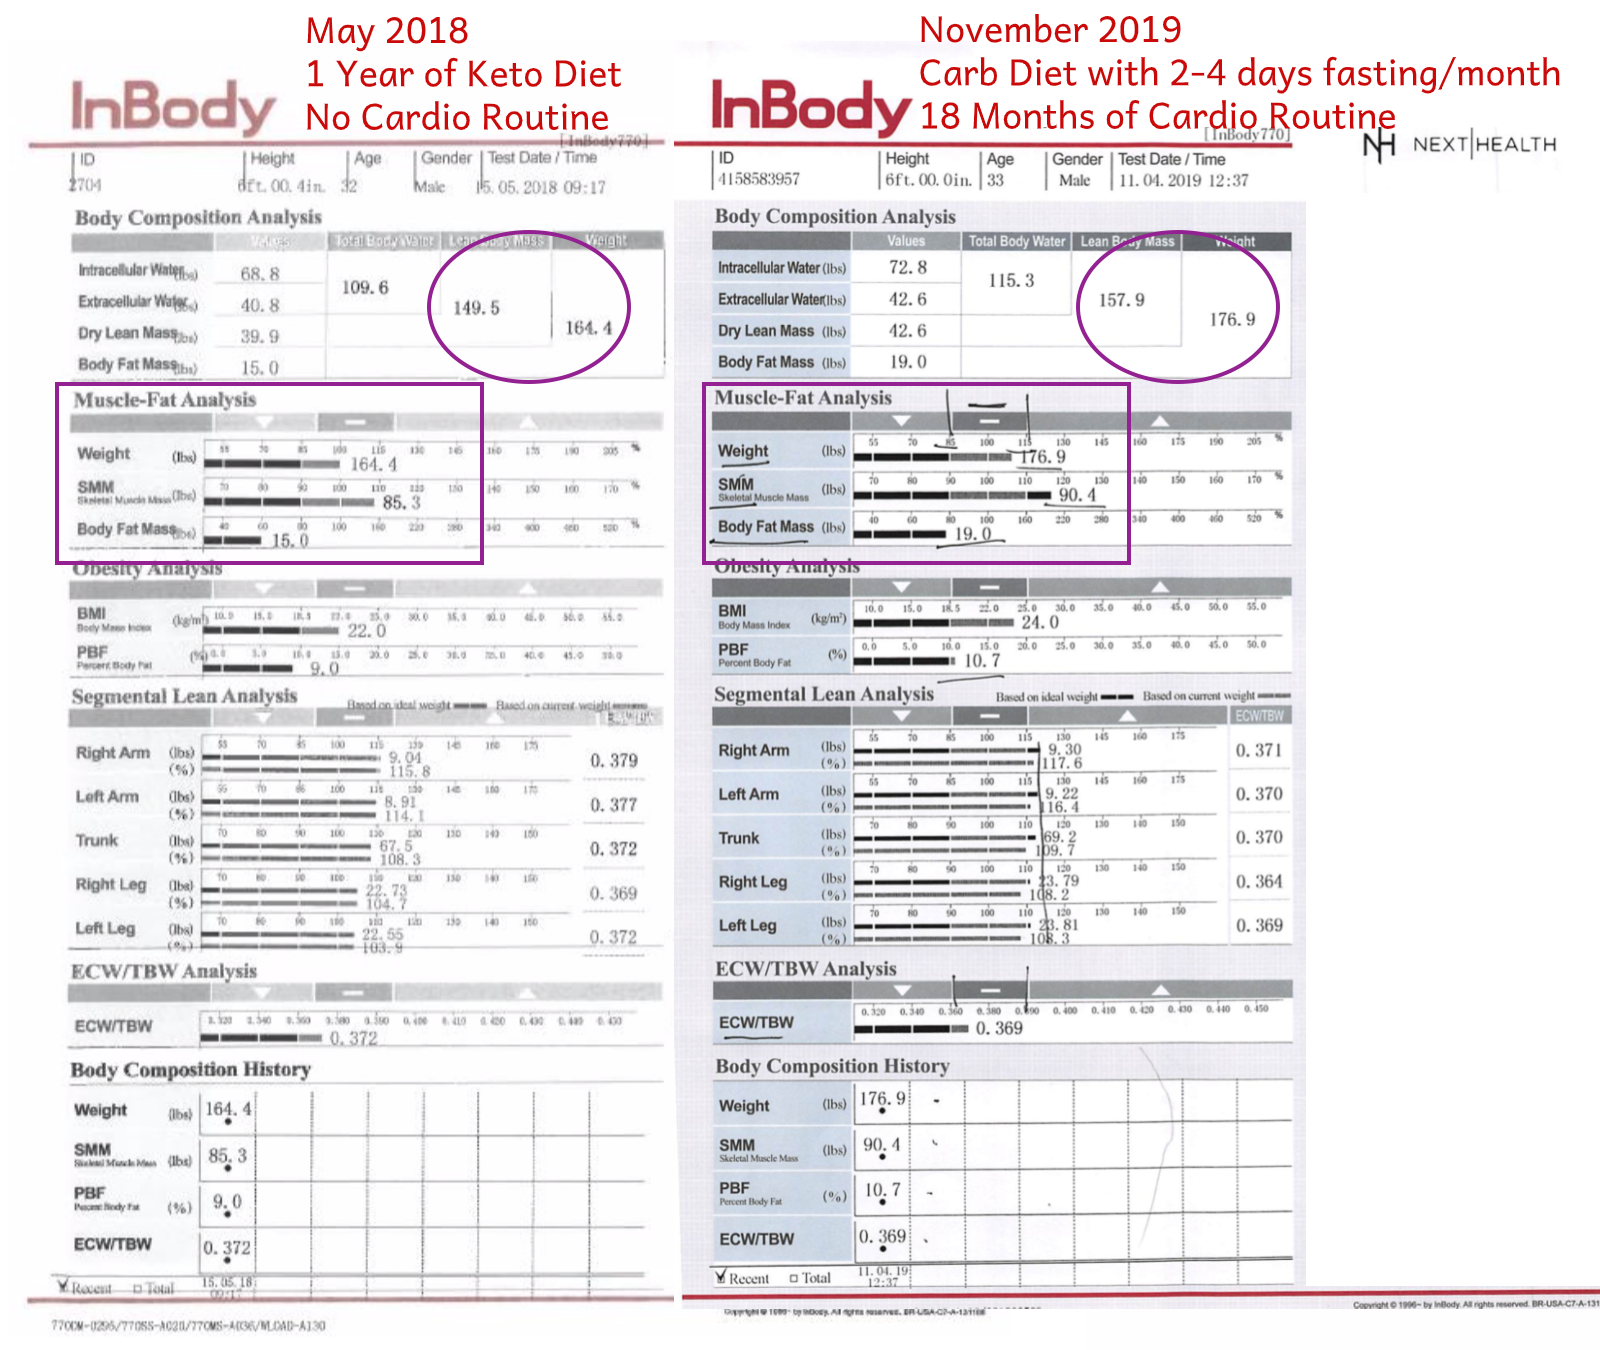  Both reports, with muscular, fat and skeletal mass highlighted. We can see solid gains in my lean mass of 8.4lbs (3.8kg). 